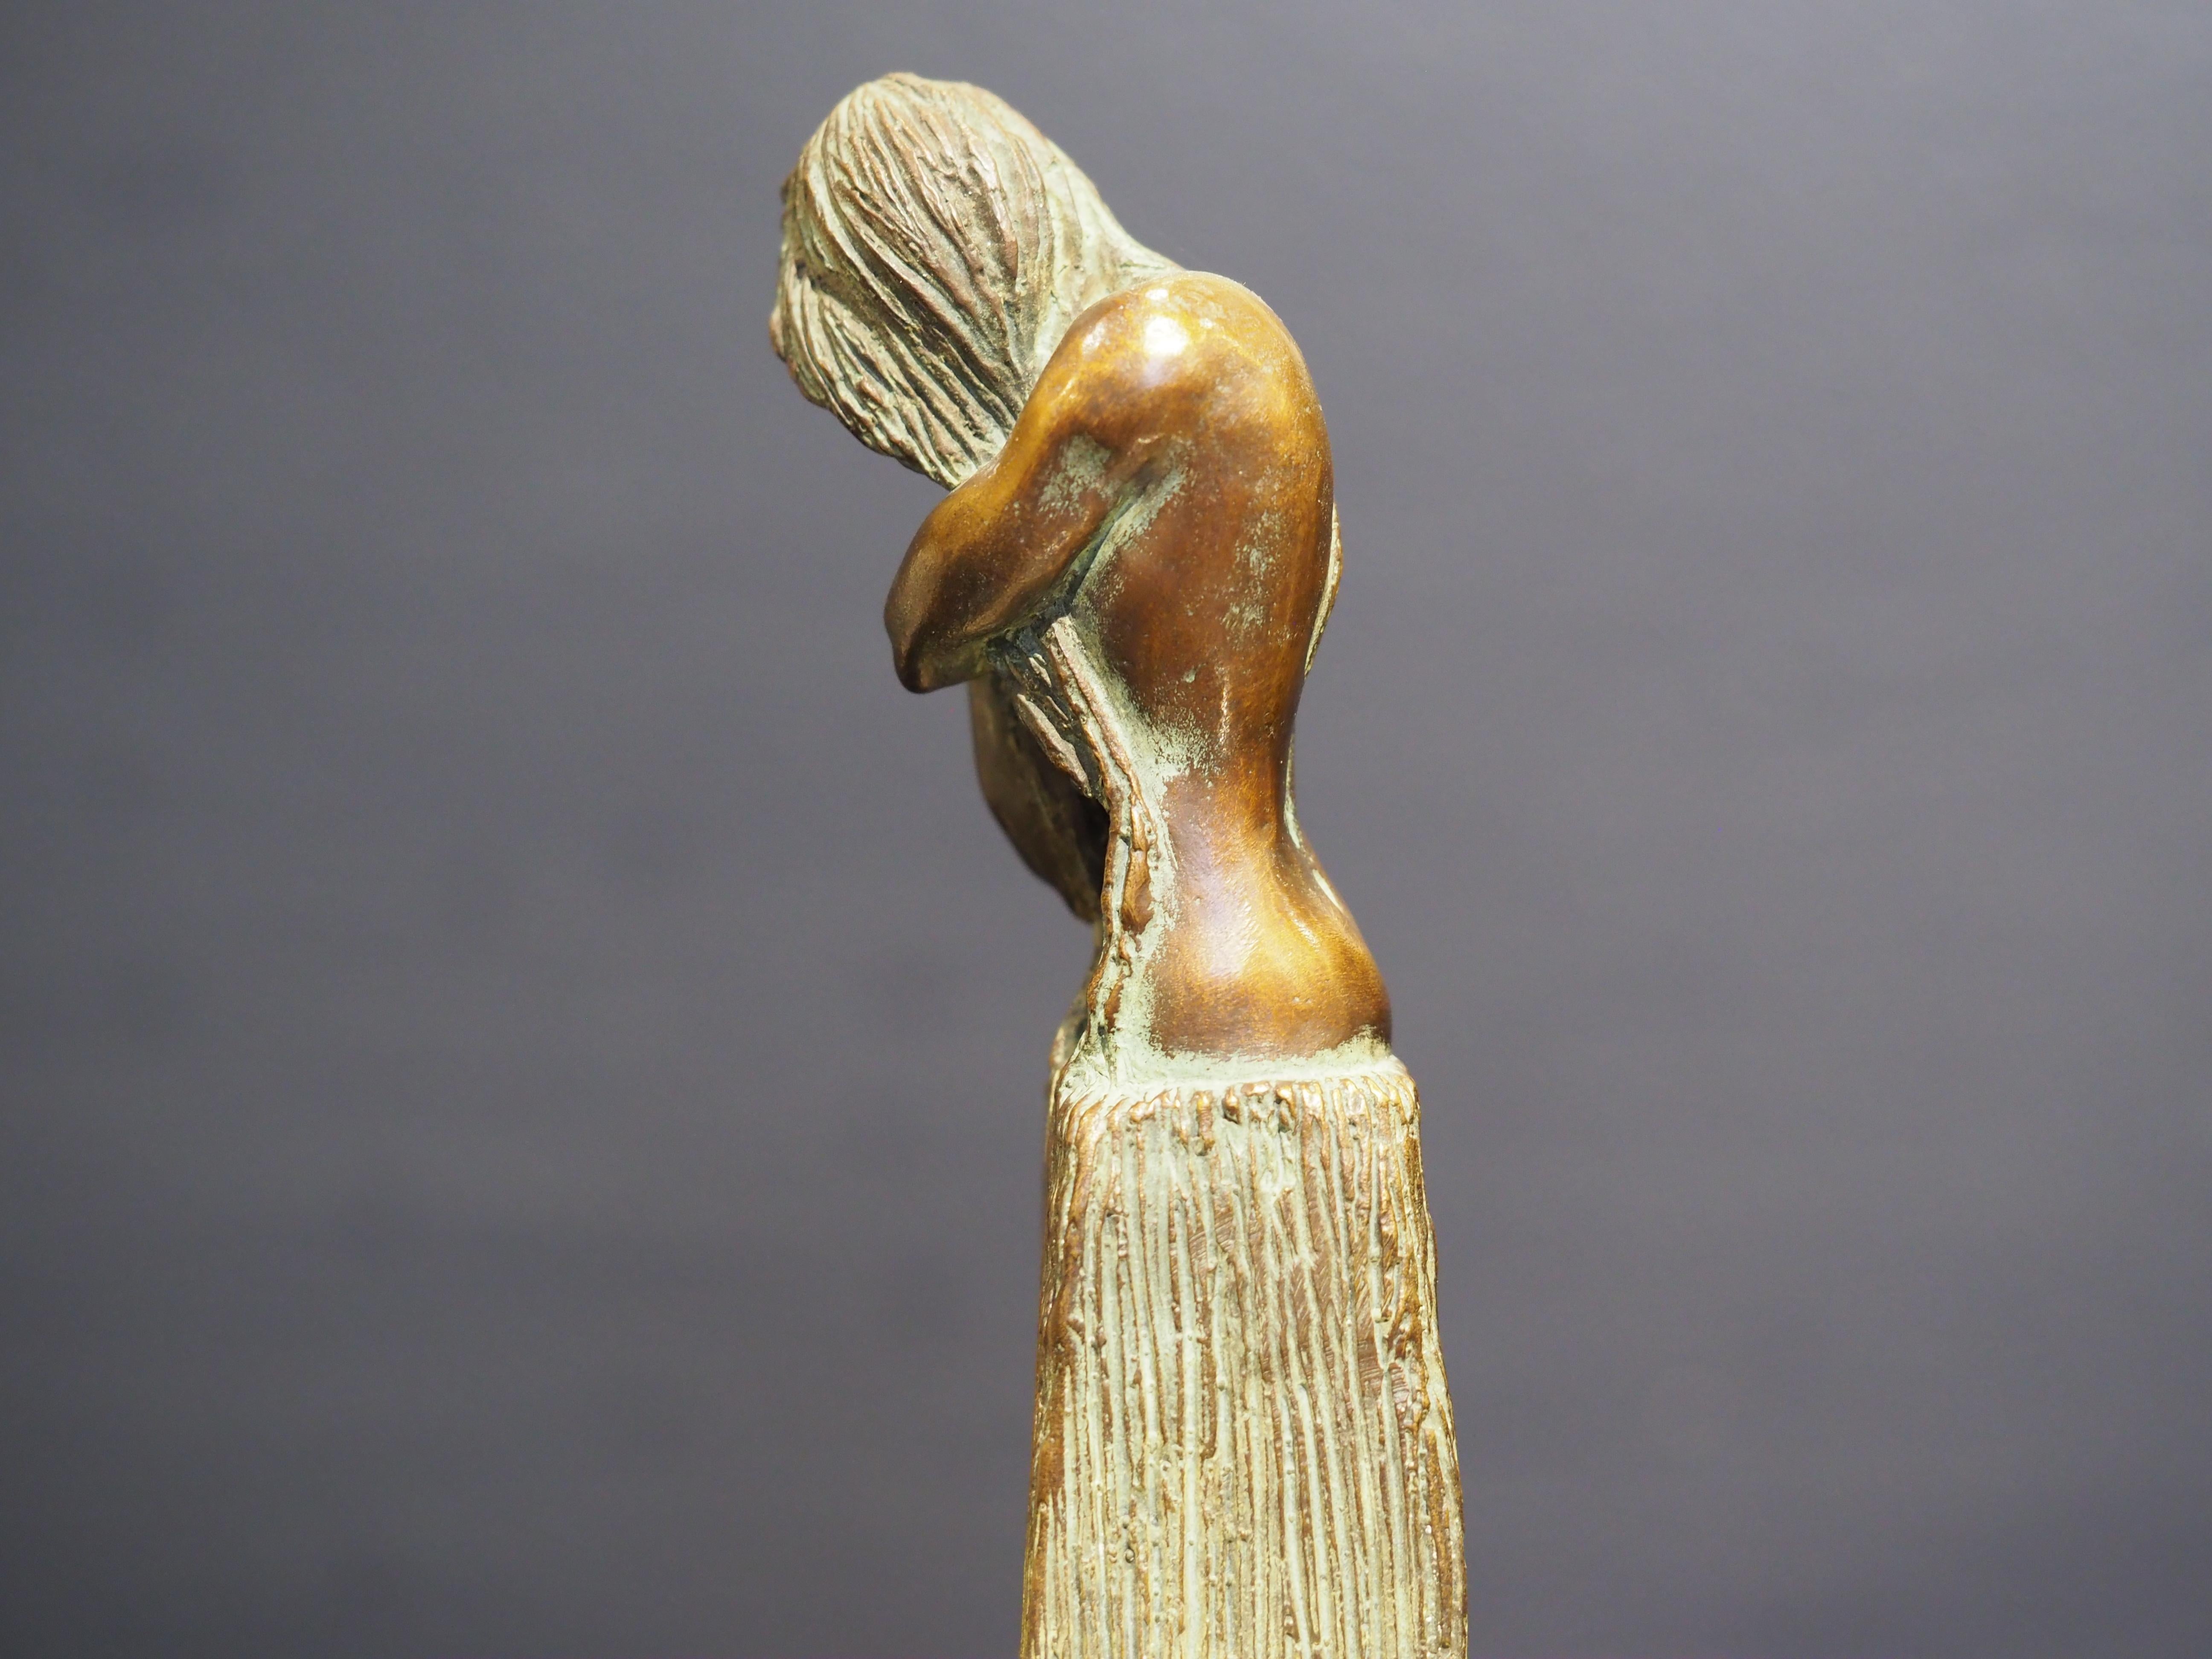 Grief - Realist Sculpture by Edward Fleming